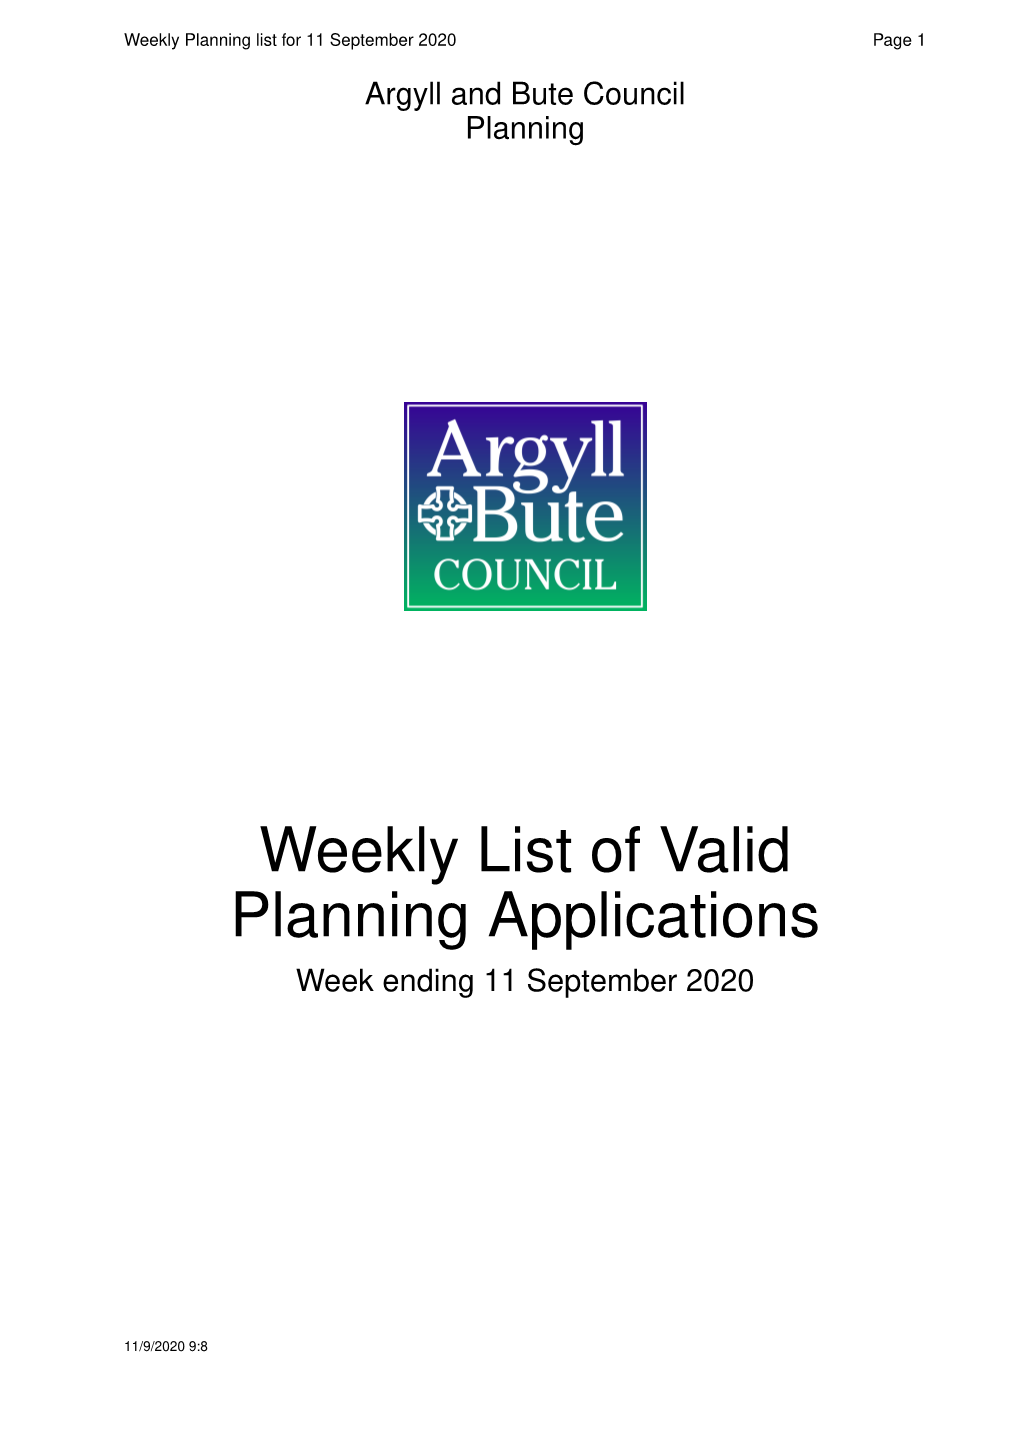 Weekly List of Valid Planning Applications 11Th September 2020